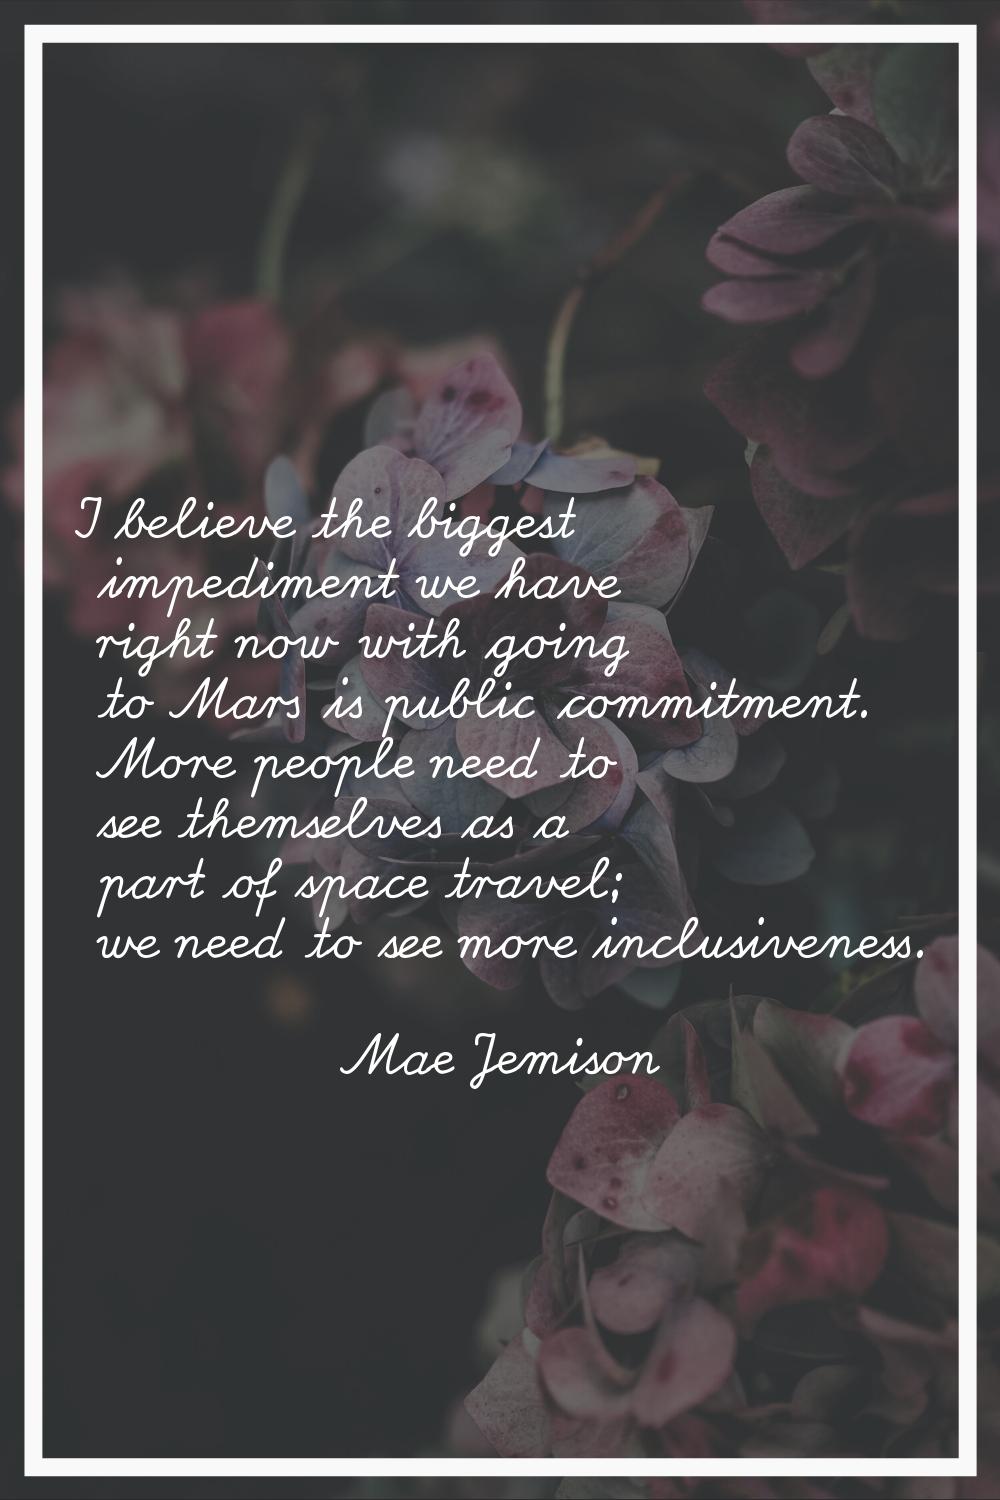 I believe the biggest impediment we have right now with going to Mars is public commitment. More pe